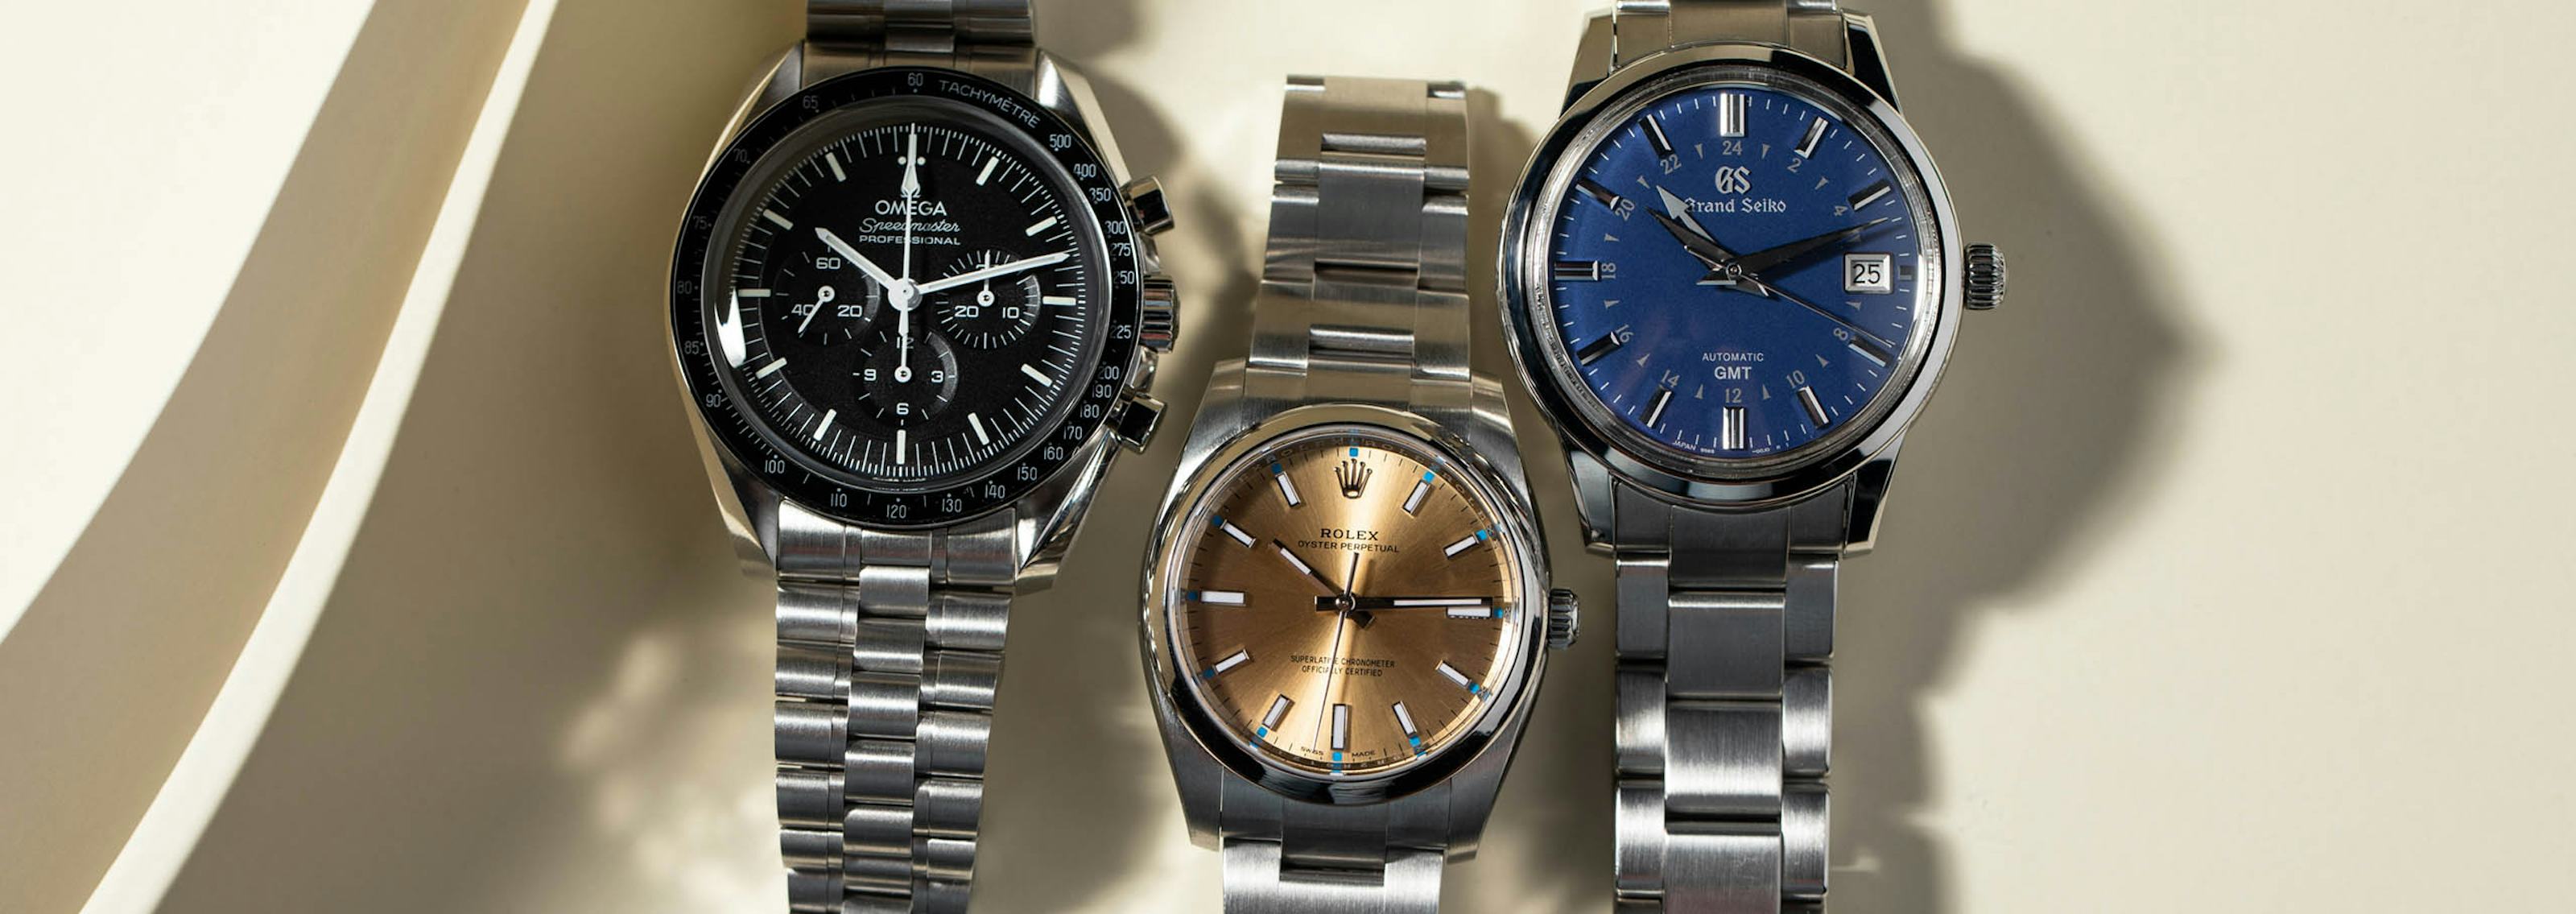 How to Build Your Watch Collection: Advice From a Pro